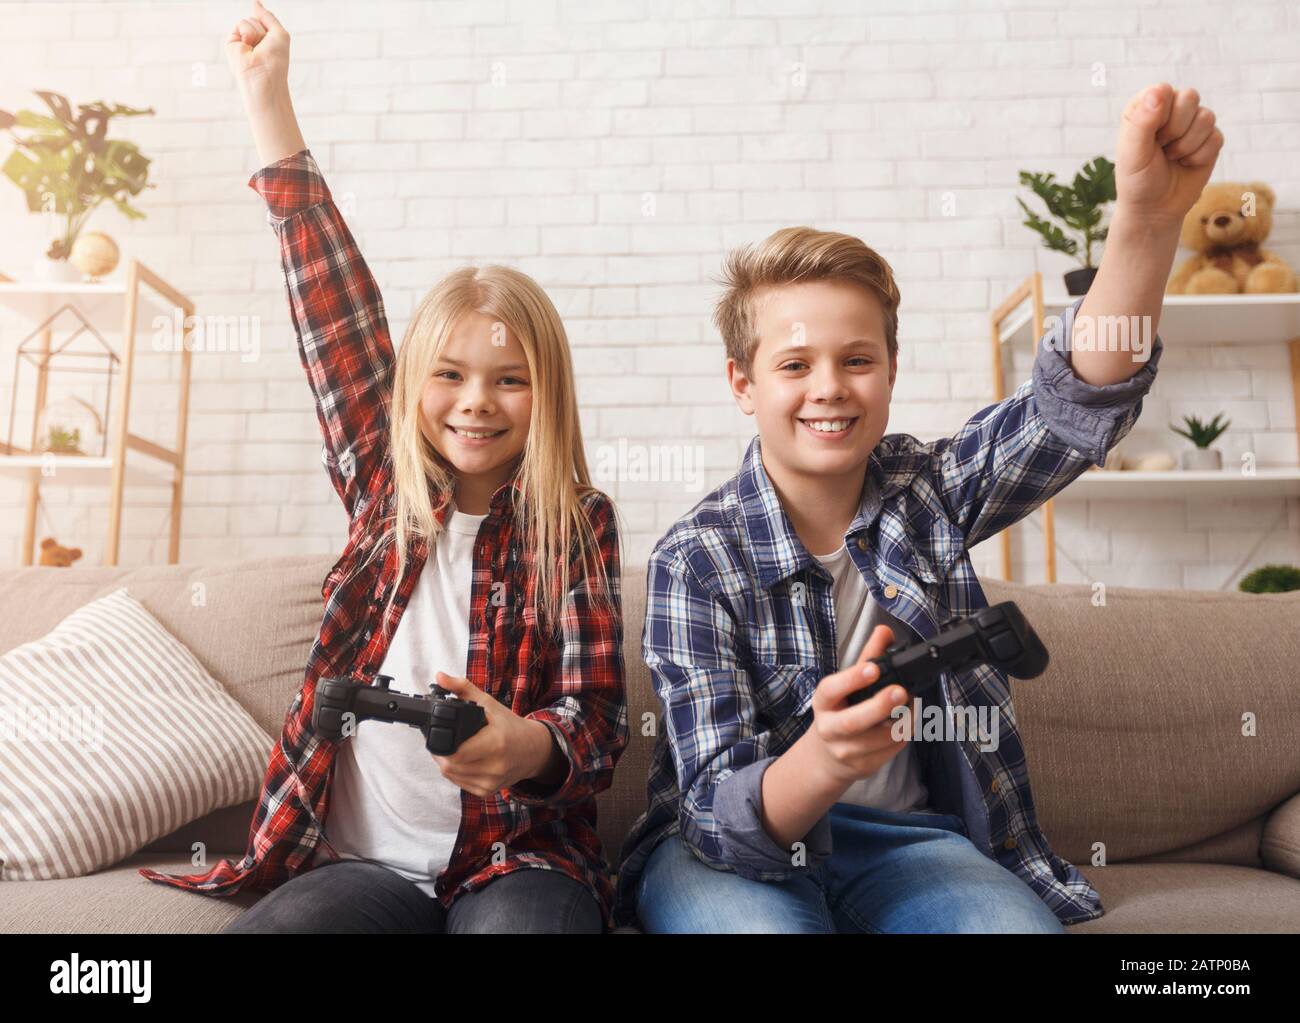 Children Playing Video Game Together Celebrating Victory Sitting On Sofa Stock Photo